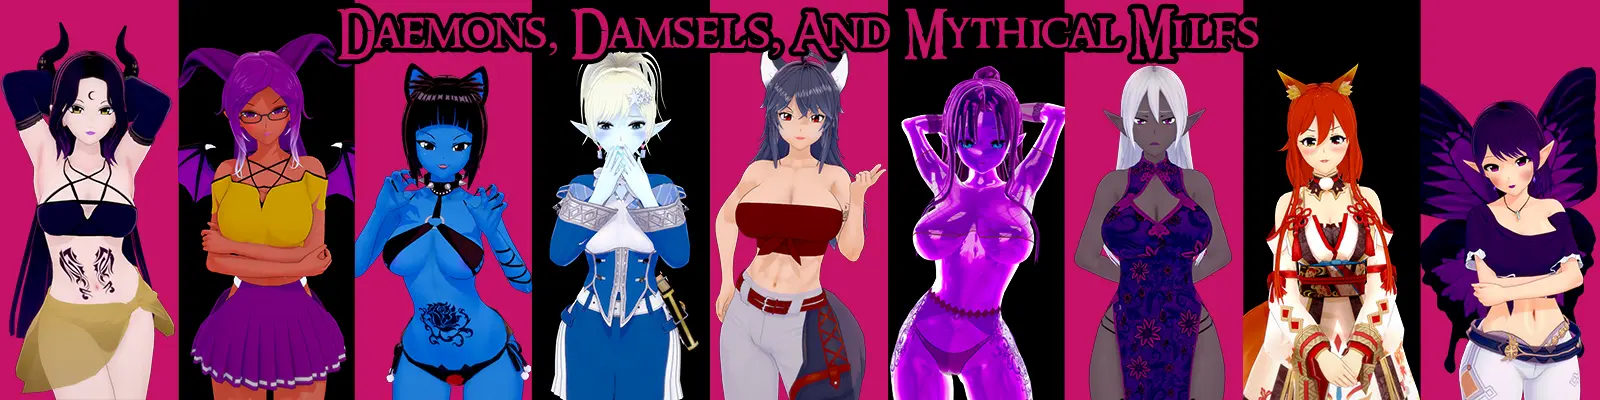 Daemons, Damsels & Mythical Milfs main image